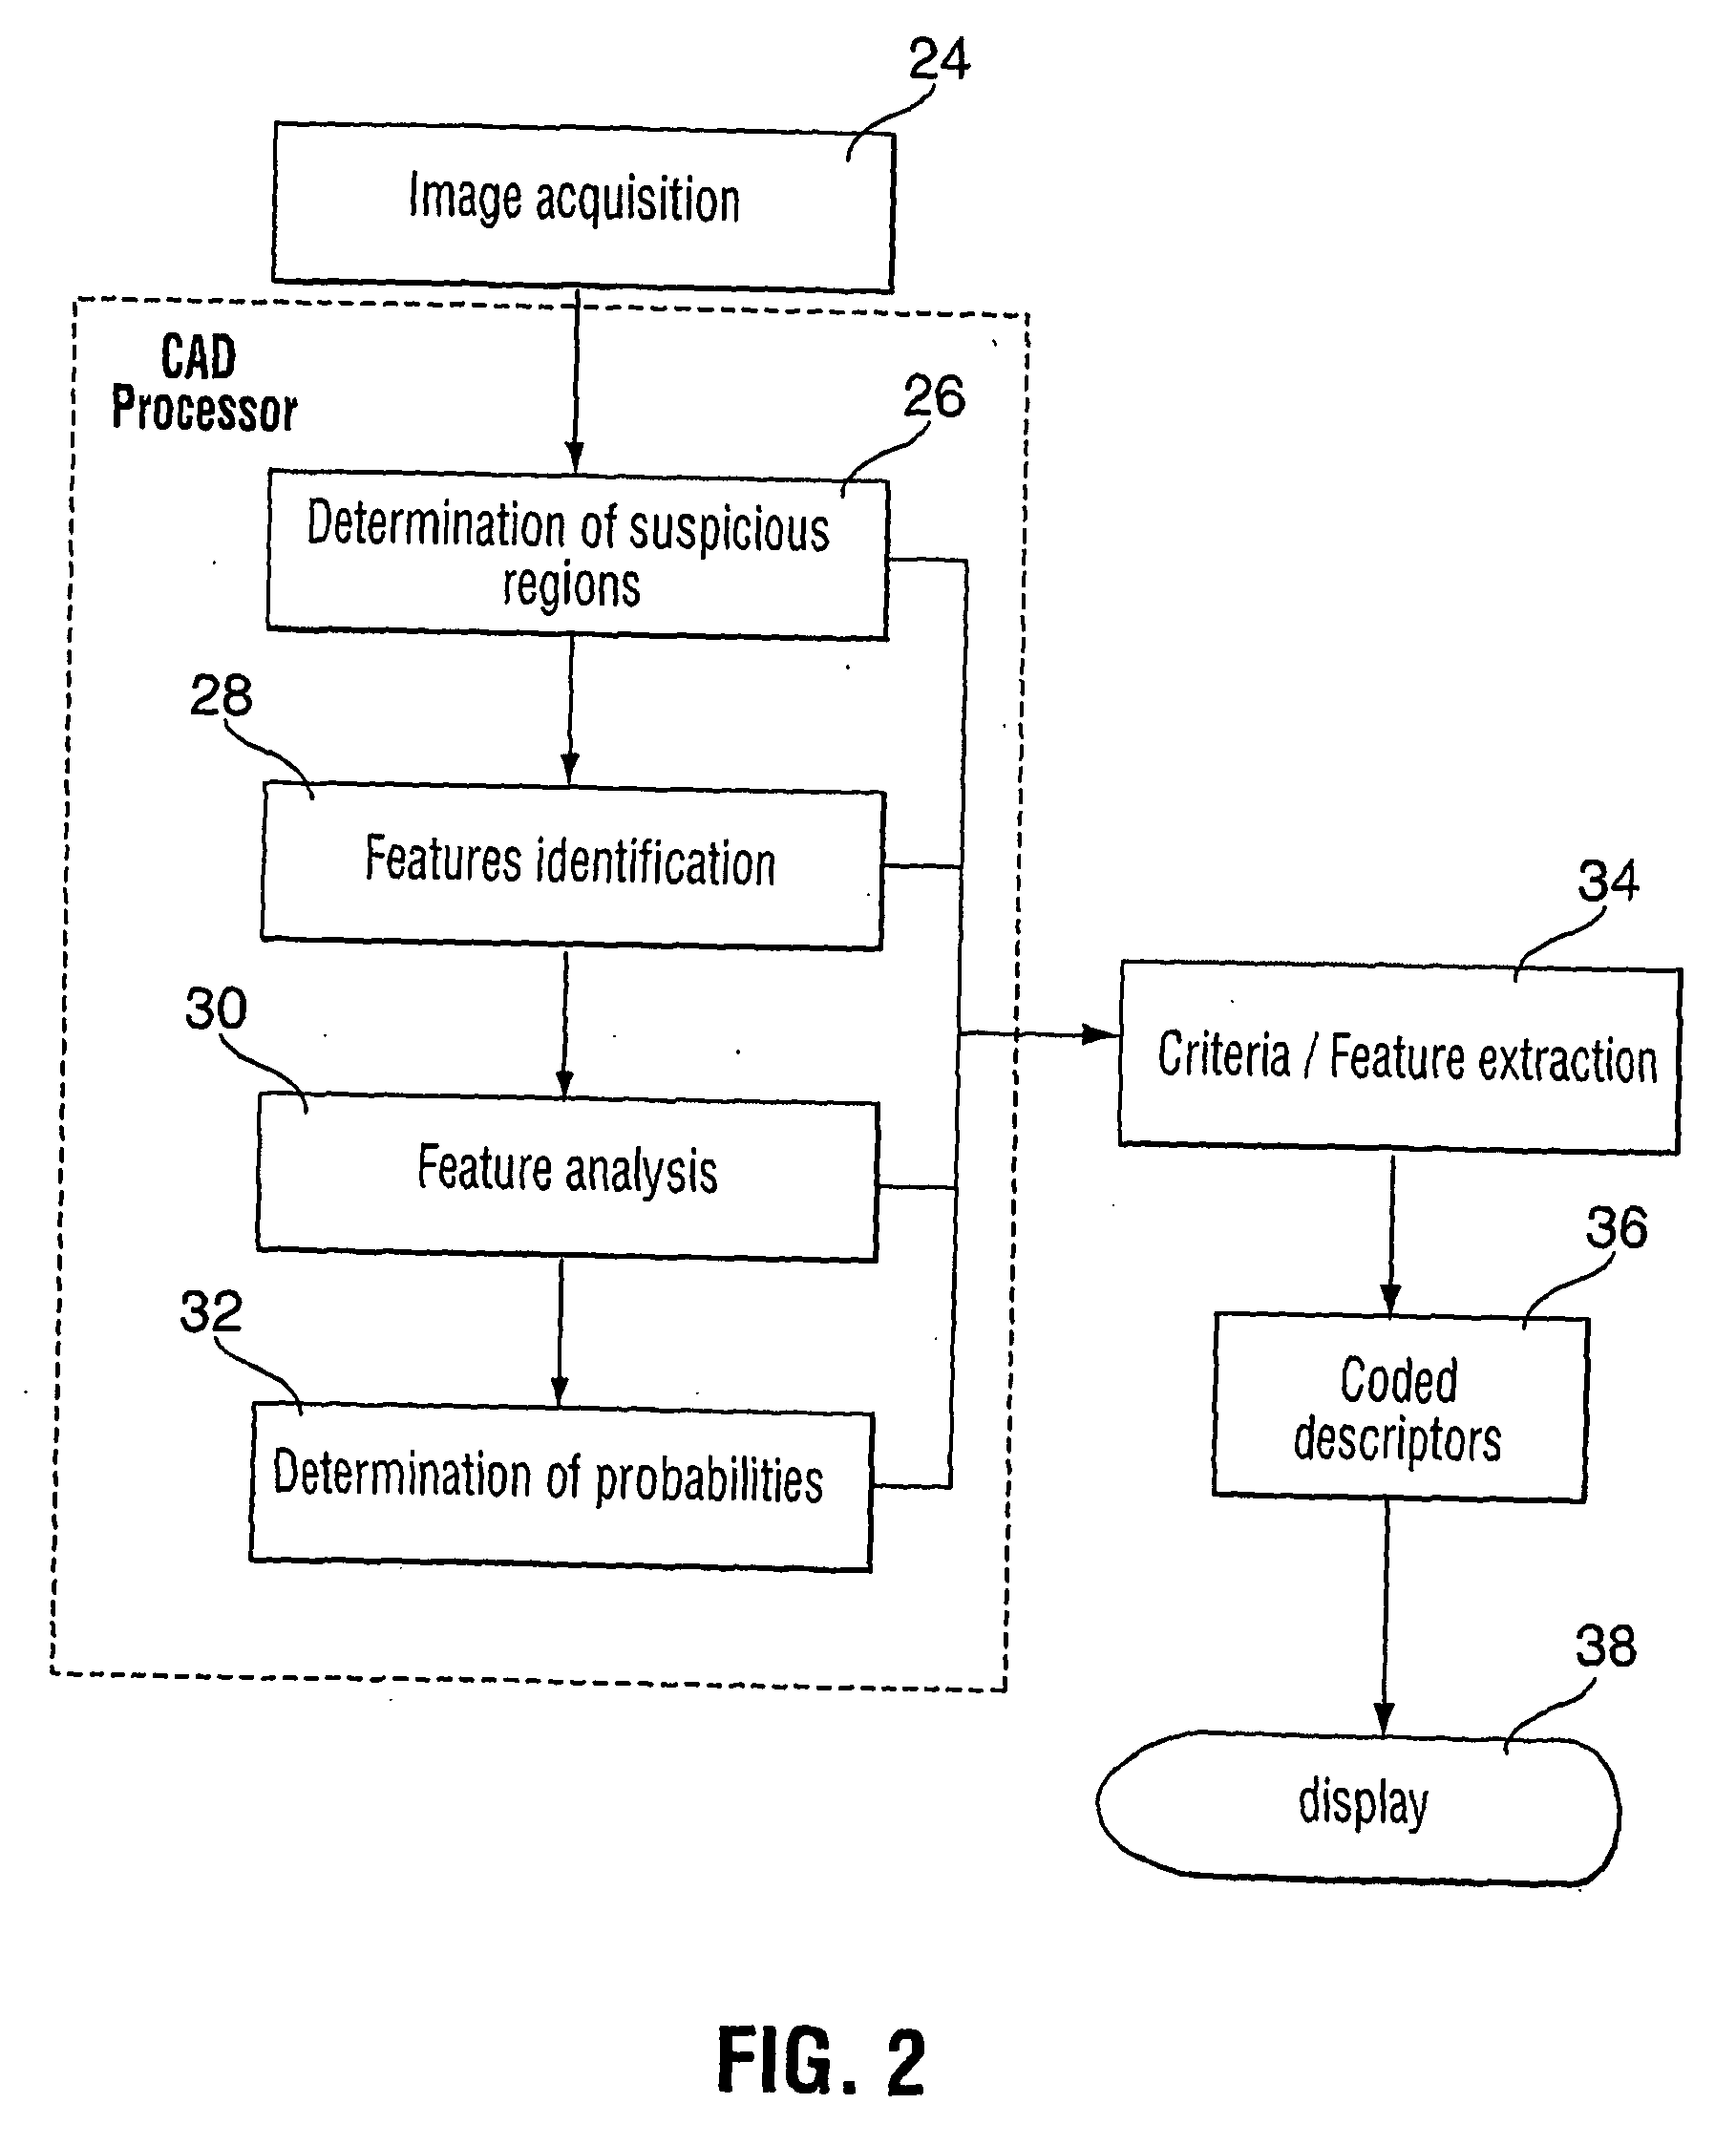 Method and system for computer aided detection (cad) cued reading of medical images